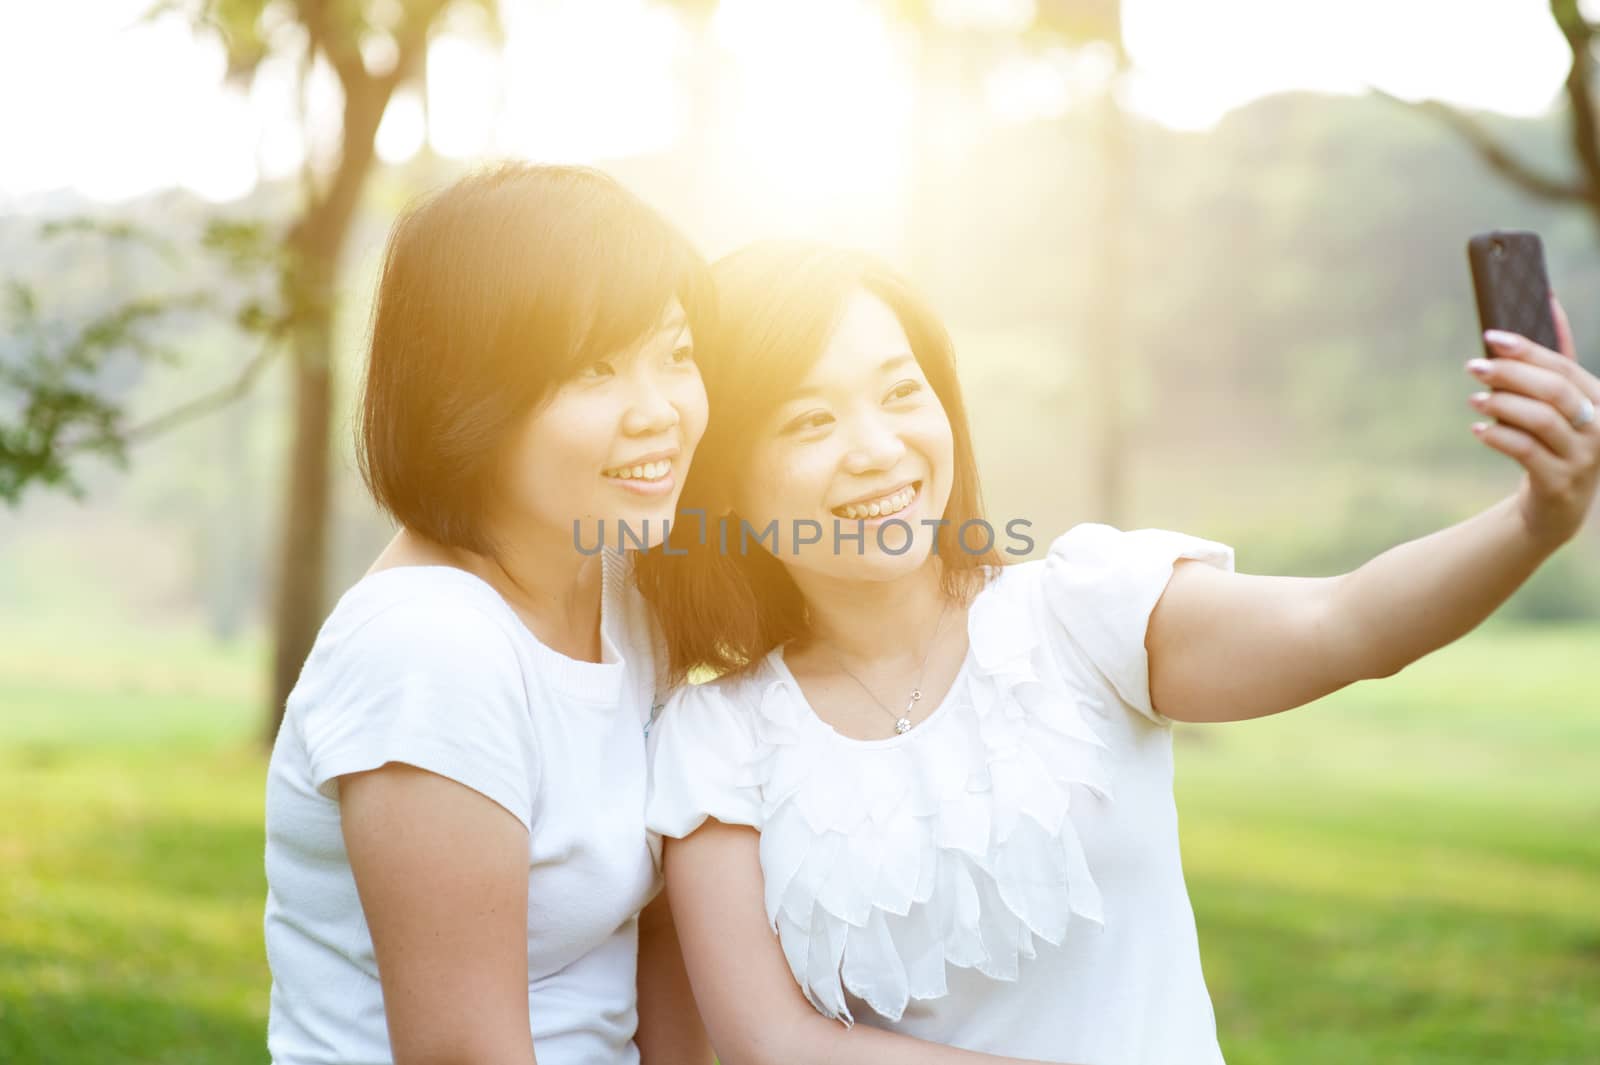 Young Asian females having fun at outdoor park, taking selfie using mobile phone camera, sun flare background.